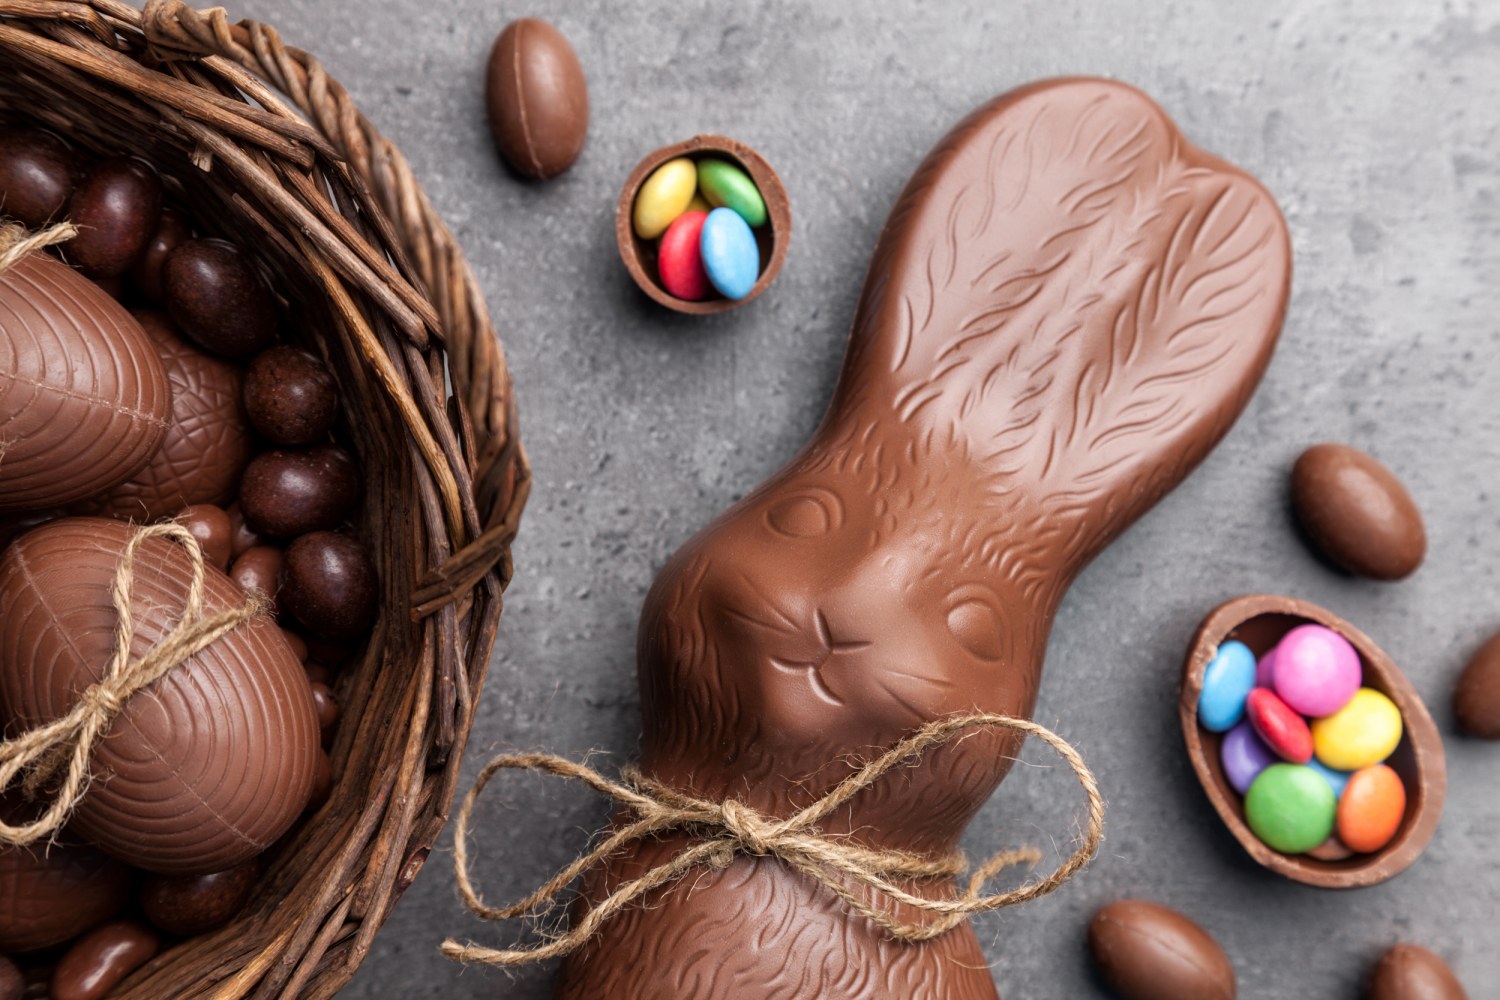 What's the healthiest Easter candy? The one you really want to eat.